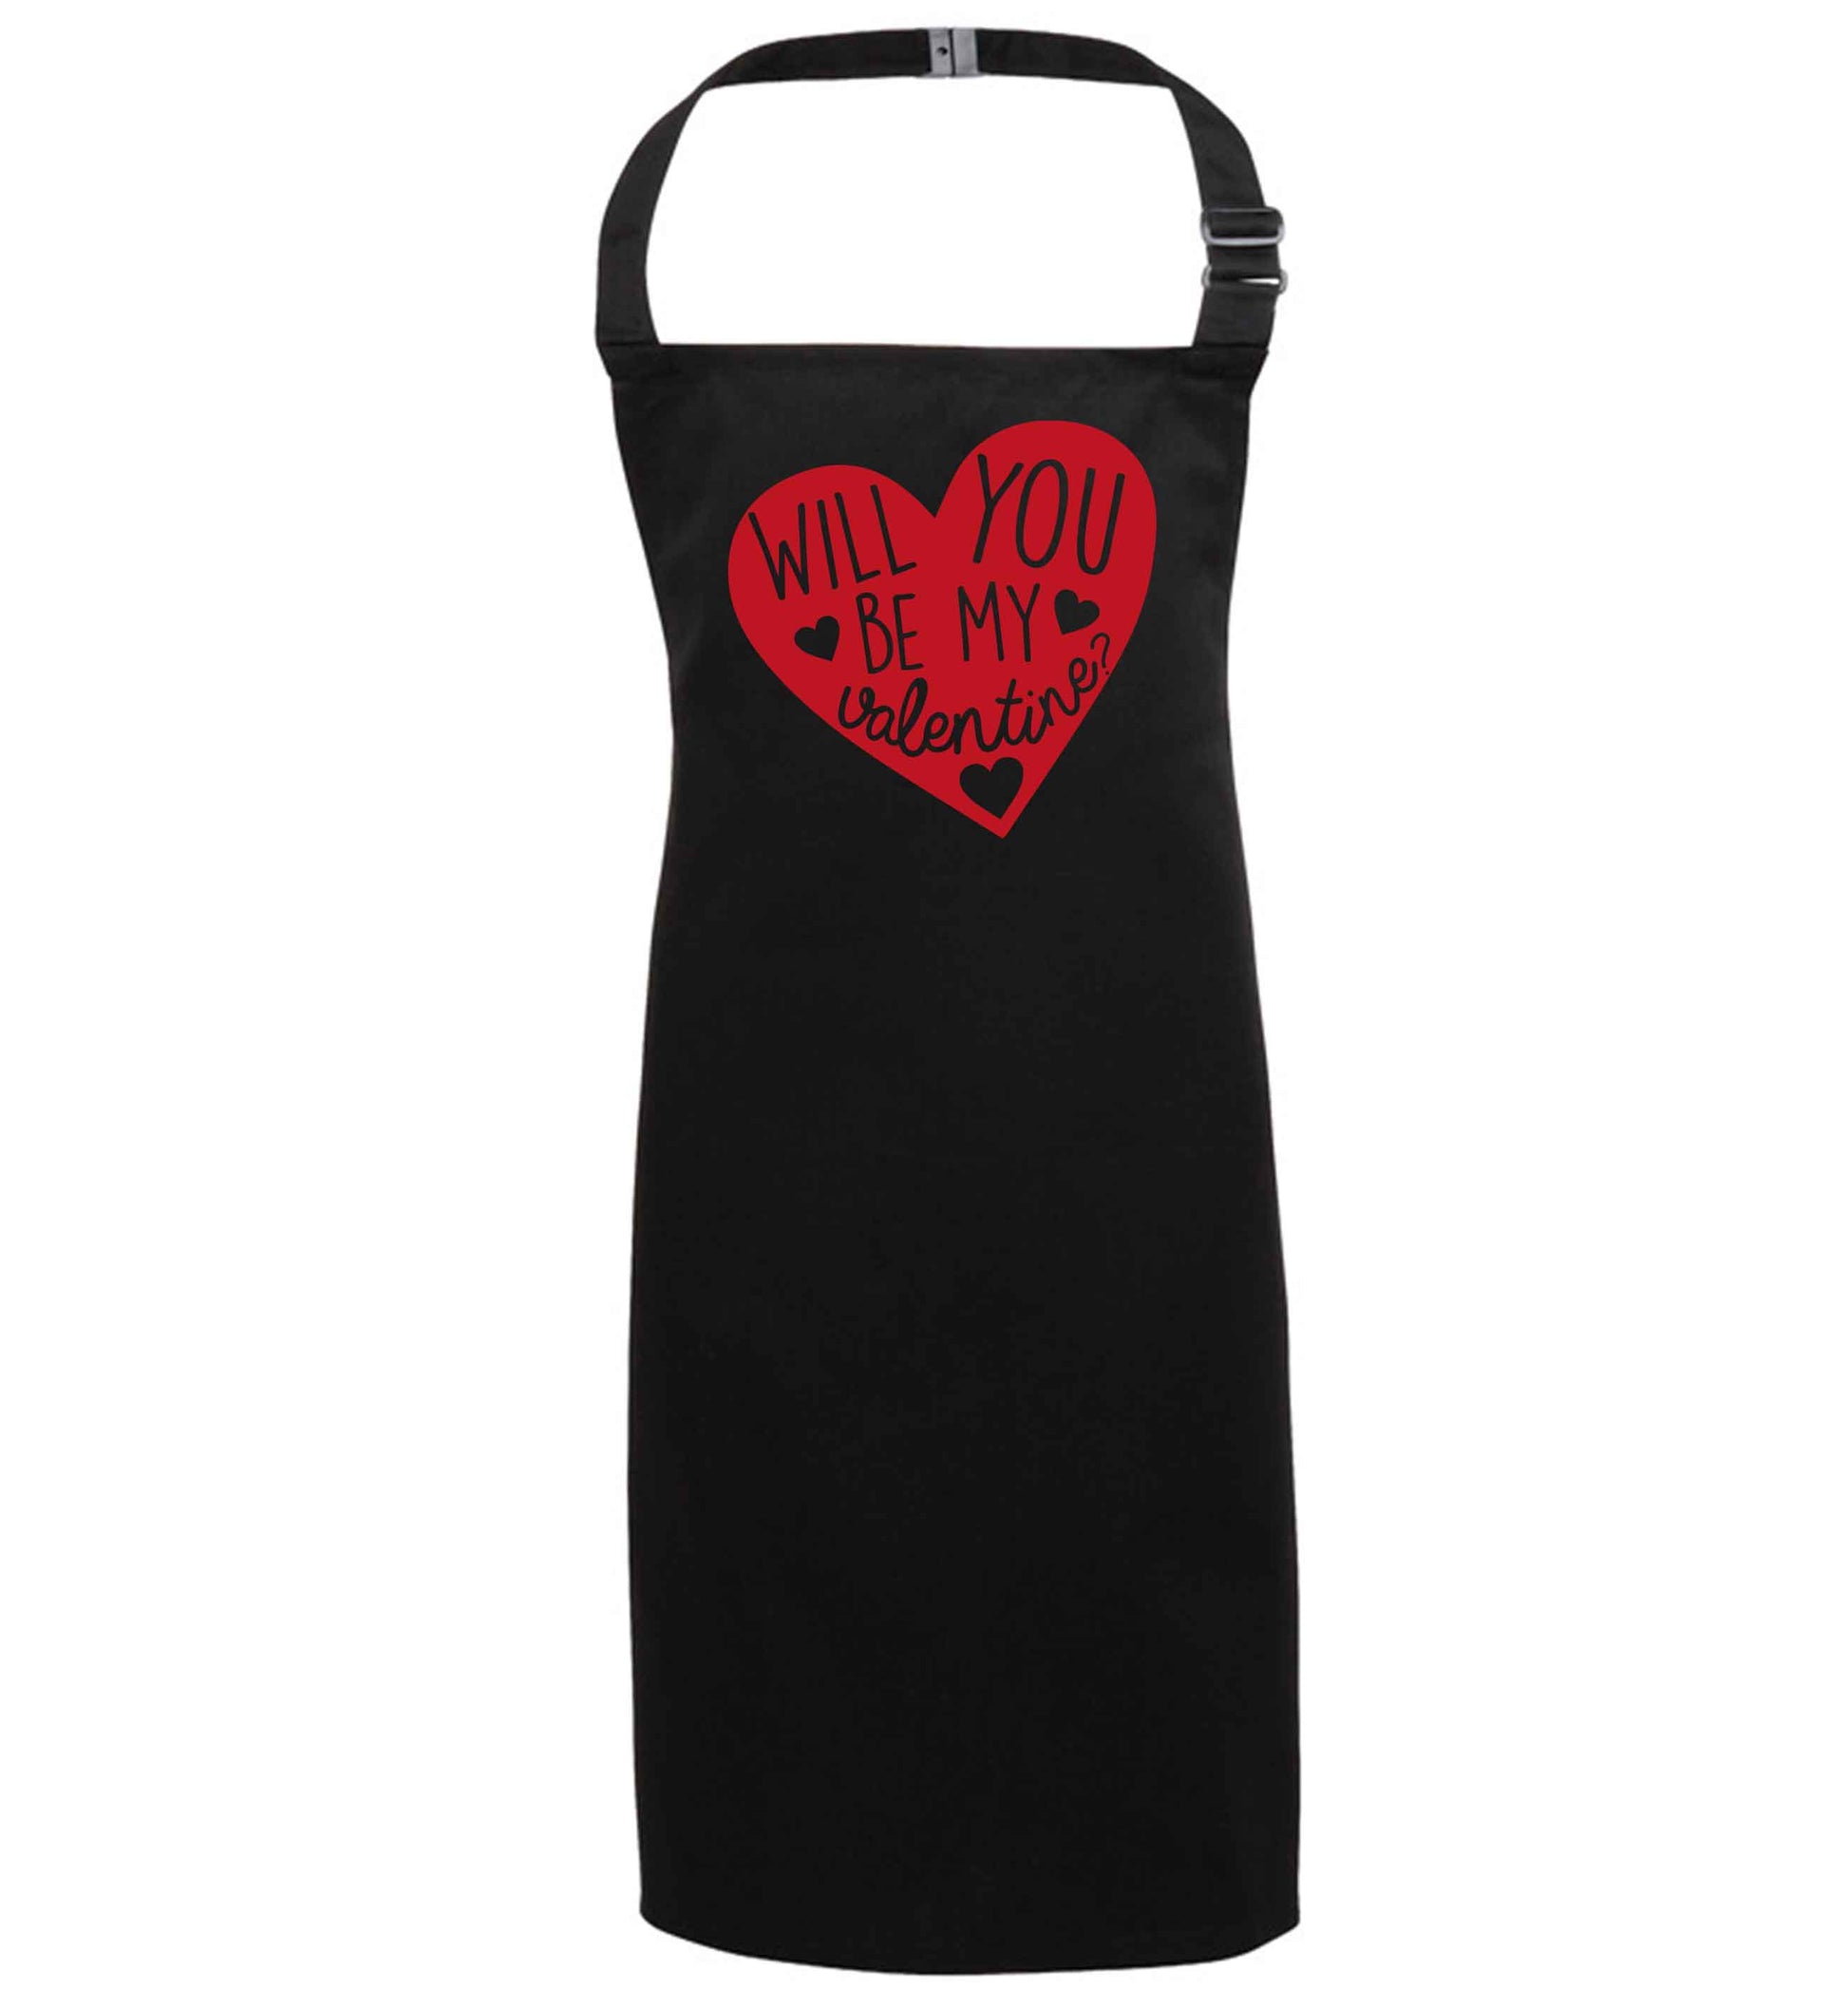 Will you be my valentine? black apron 7-10 years